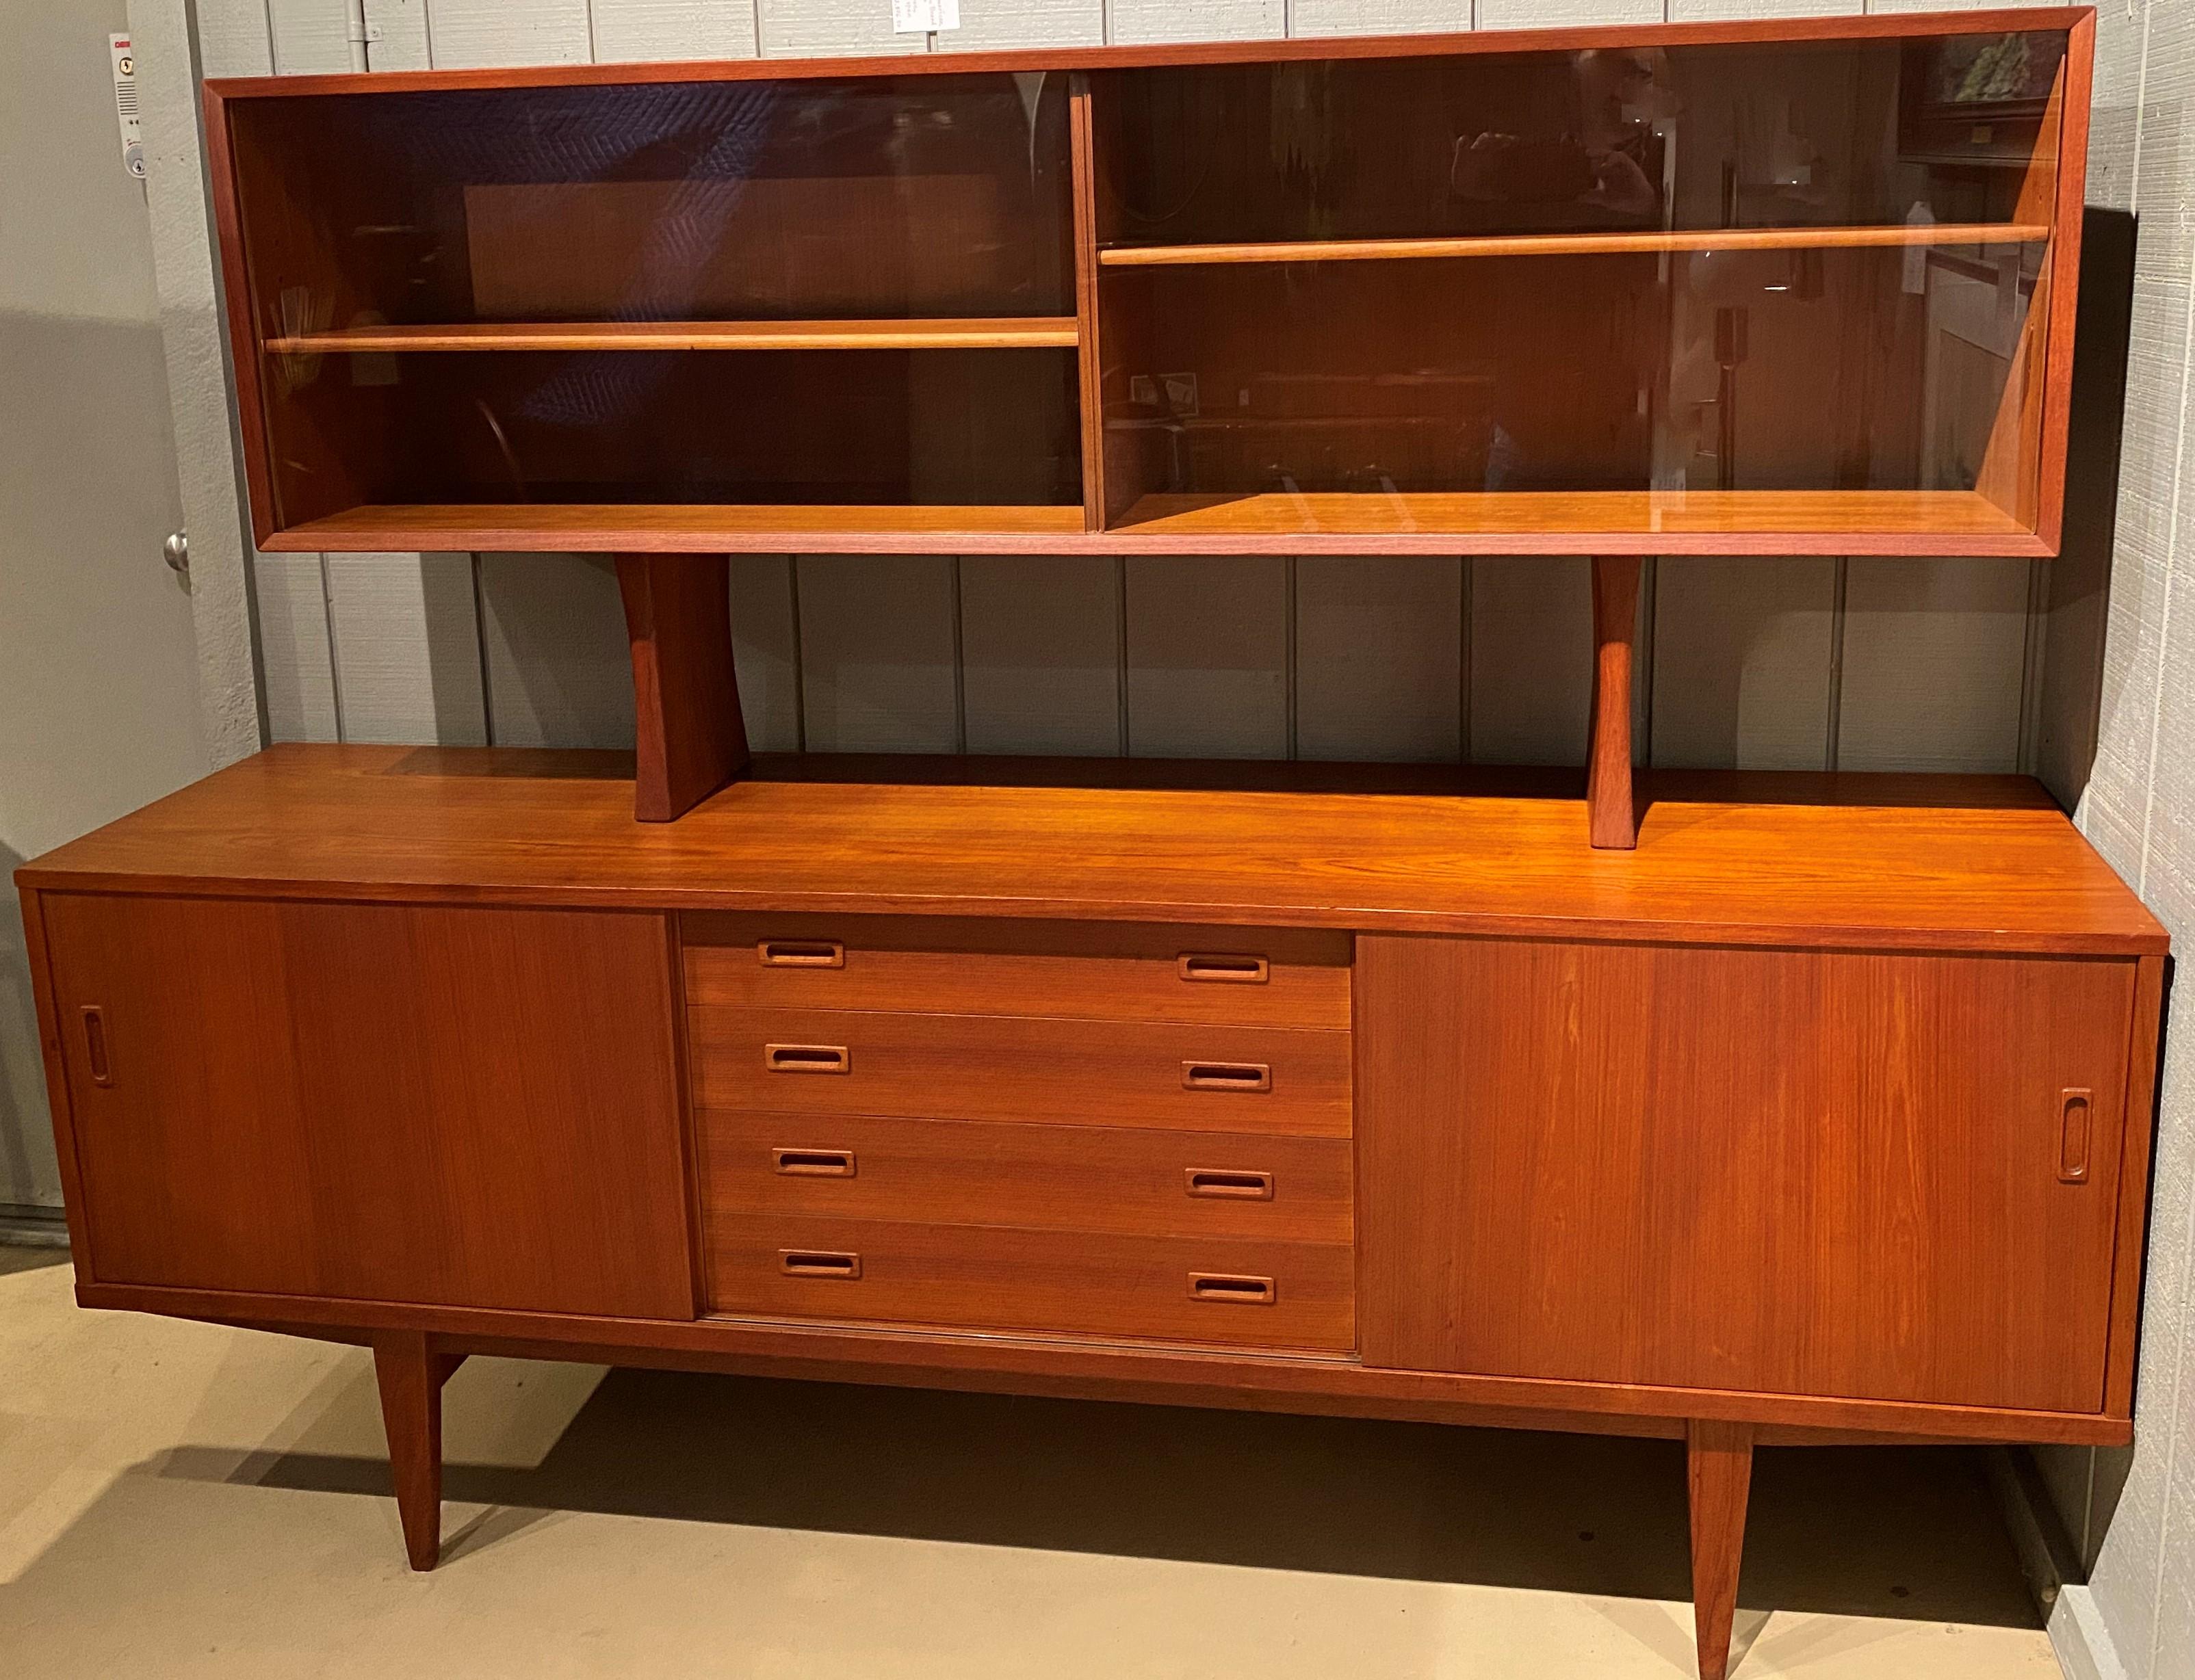 A sleek design midcentury teak credenza by Danish designer Grete Jalk (1920-2006) with a removable upper display cabinet with two sliding glass doors opening to two adjustable single shelf compartments, over a lower case with an inset set of four